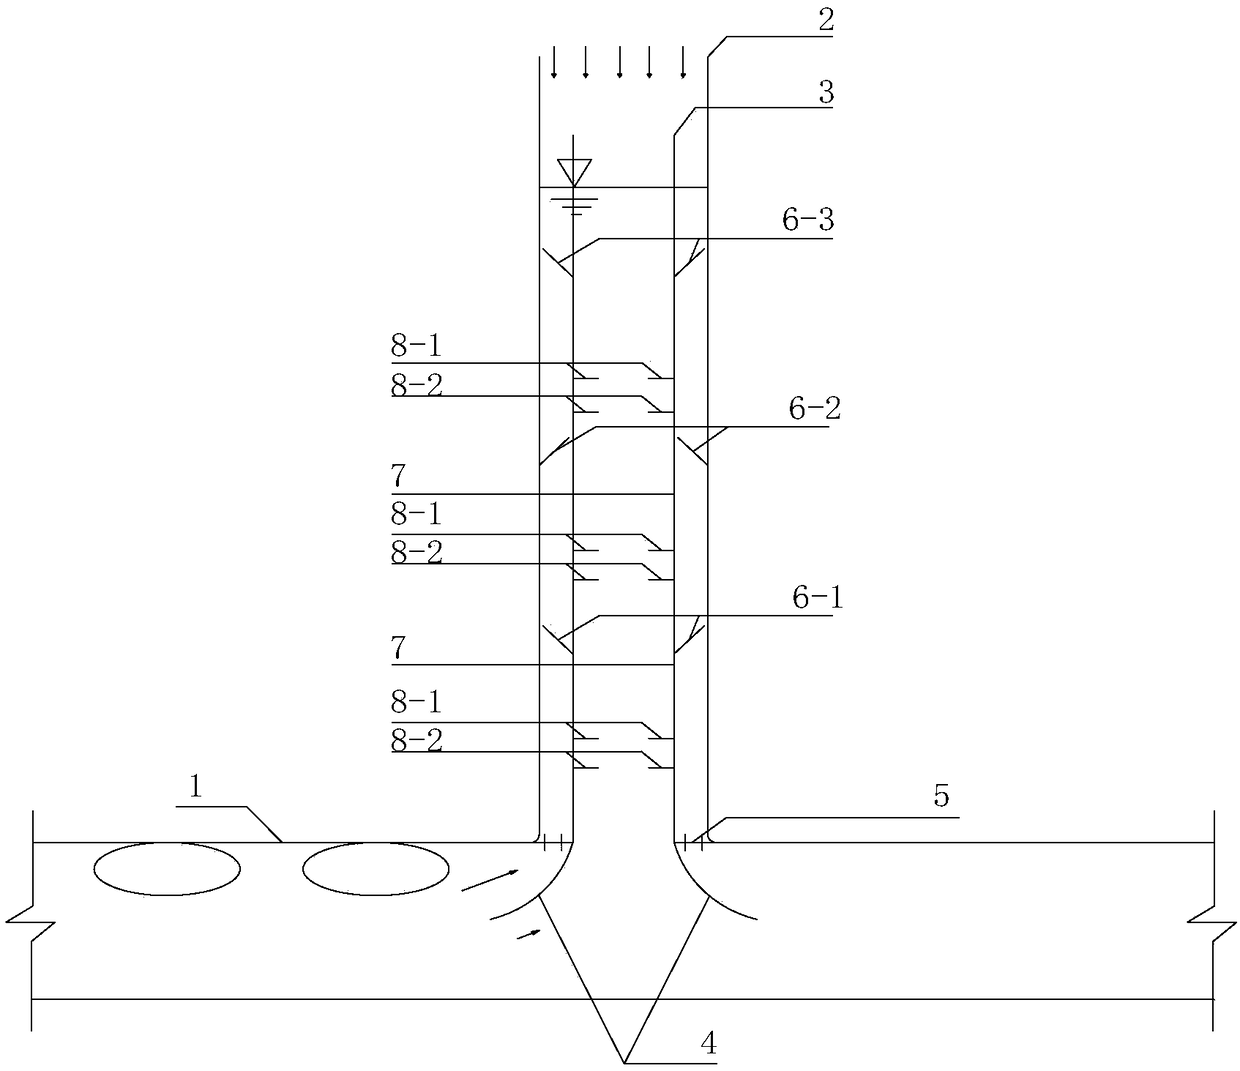 Inflow vertical shaft for reducing gas explosion intensity of urban deep drainage system